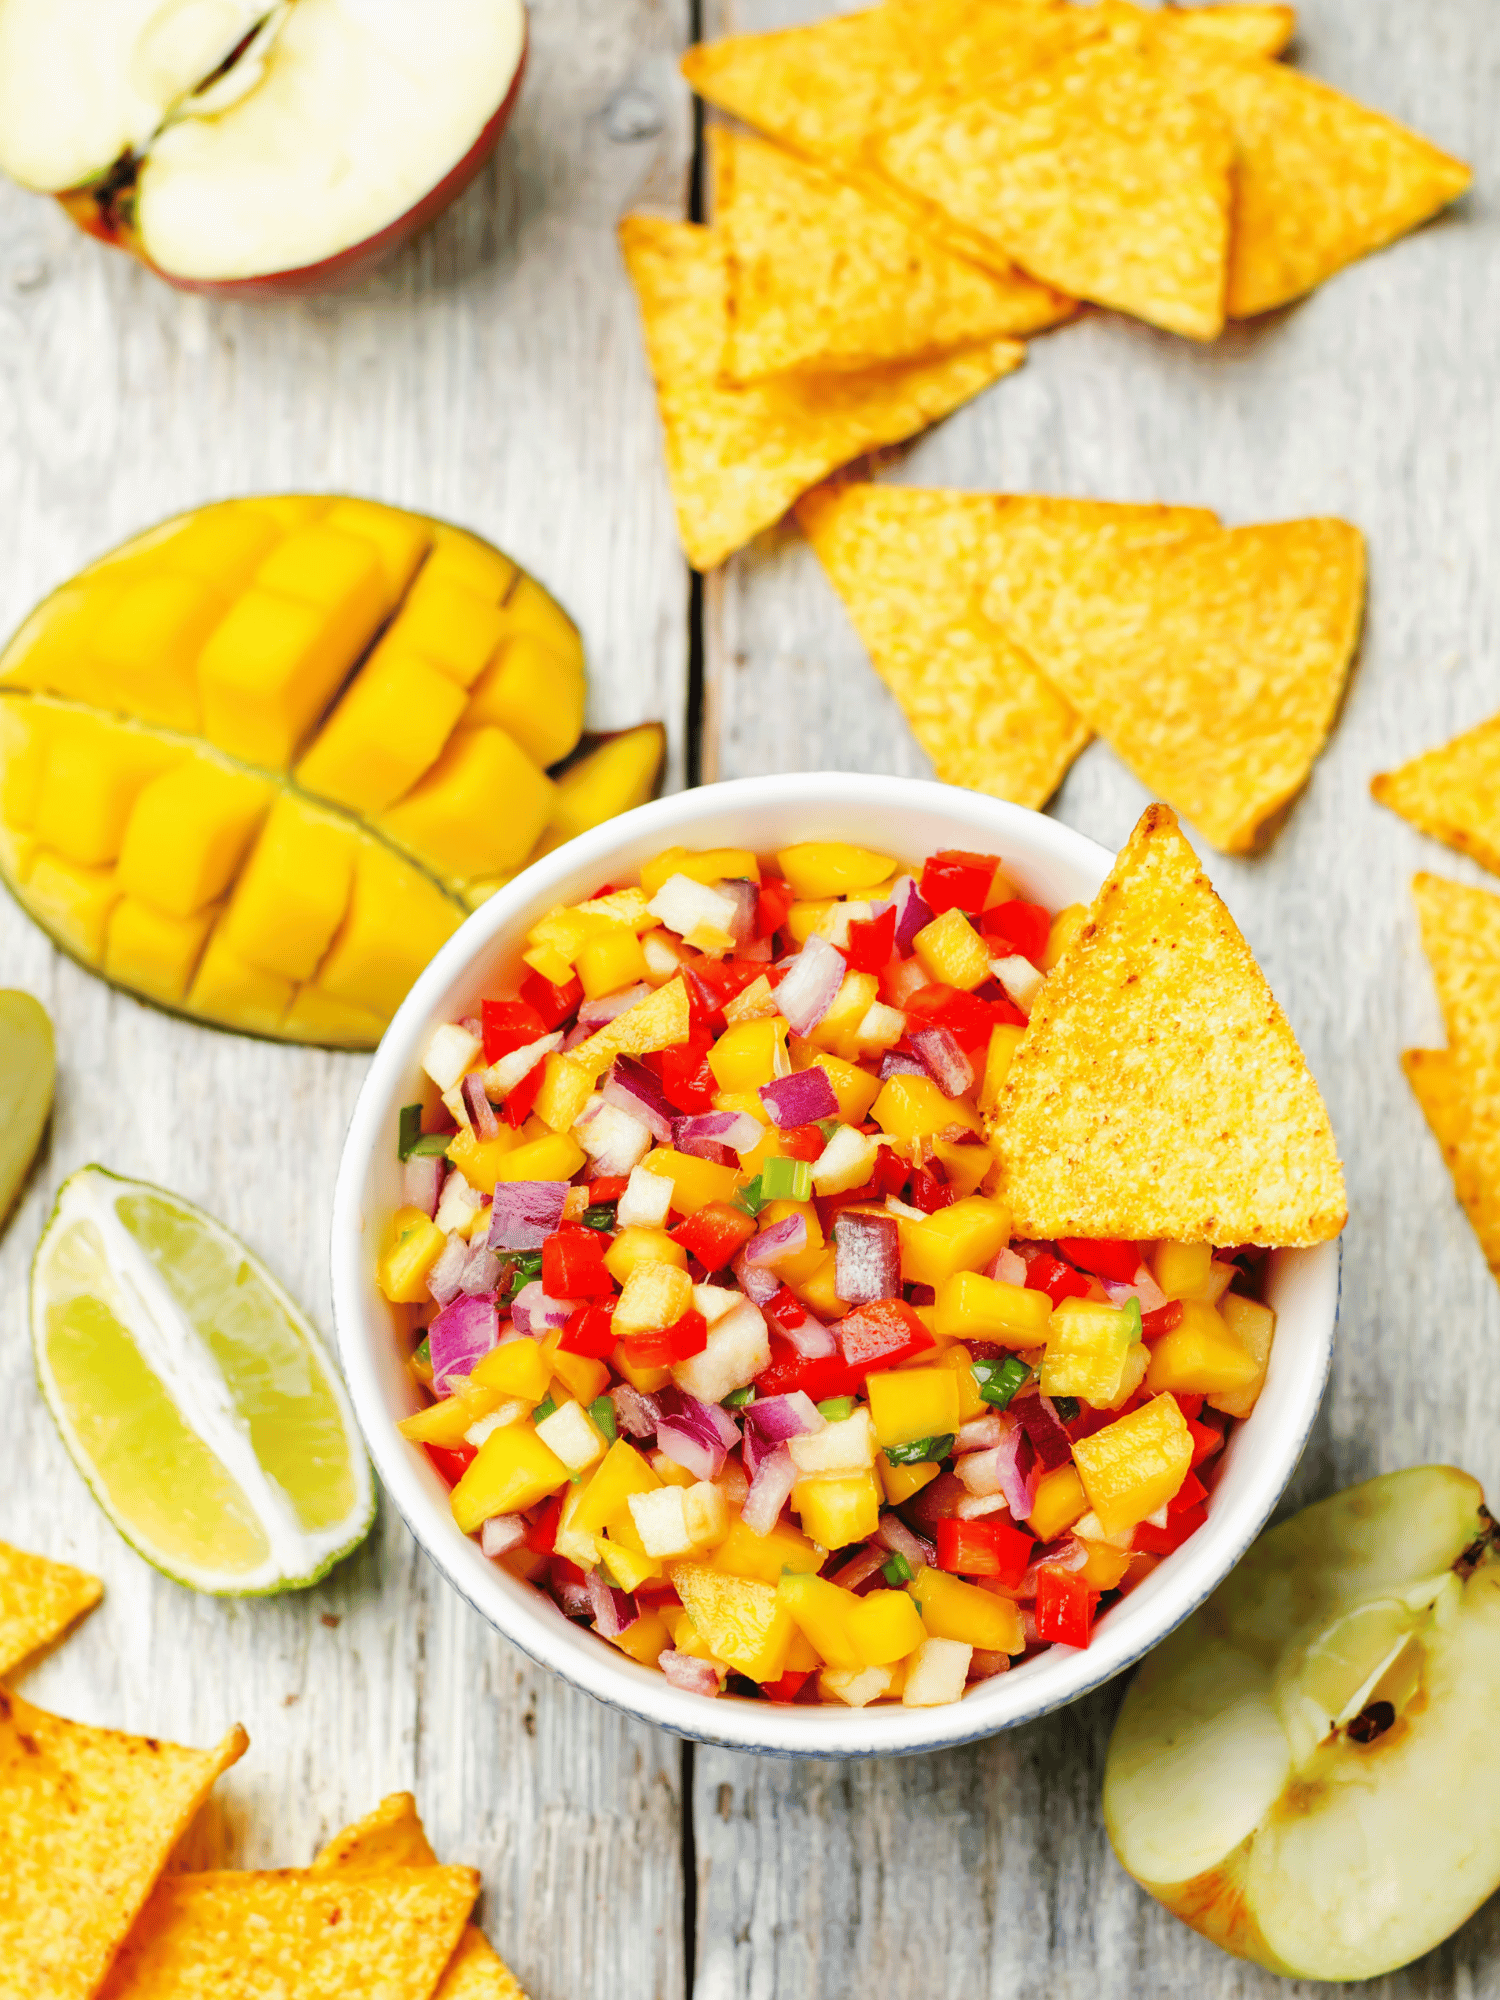 Mango Salsa With Whole Grain Chips Recipe: A Tropical Snack